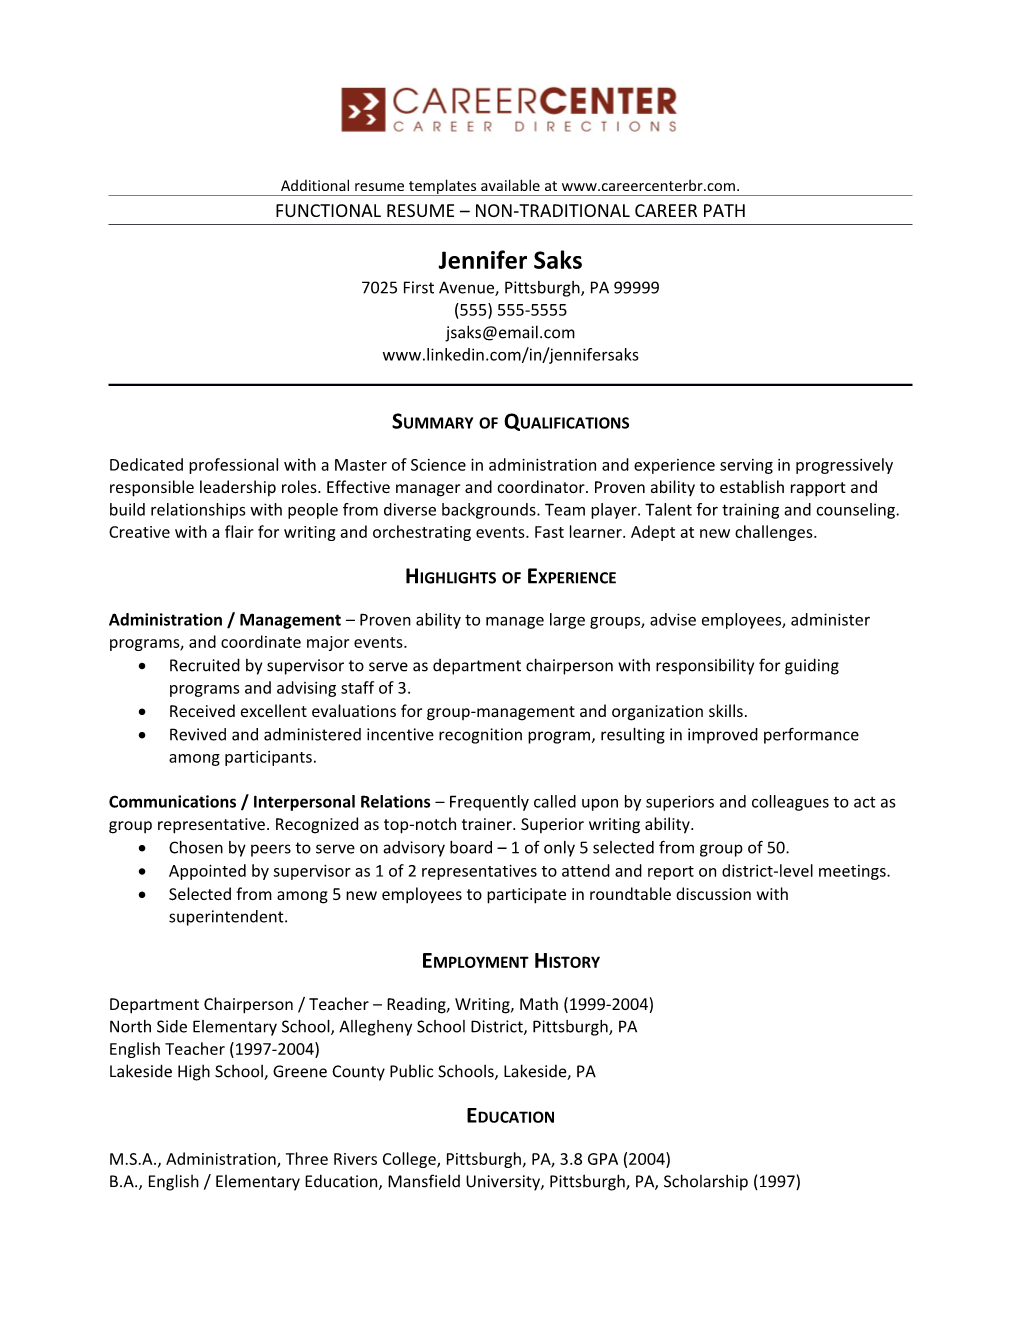 Additional Resume Templates Available At